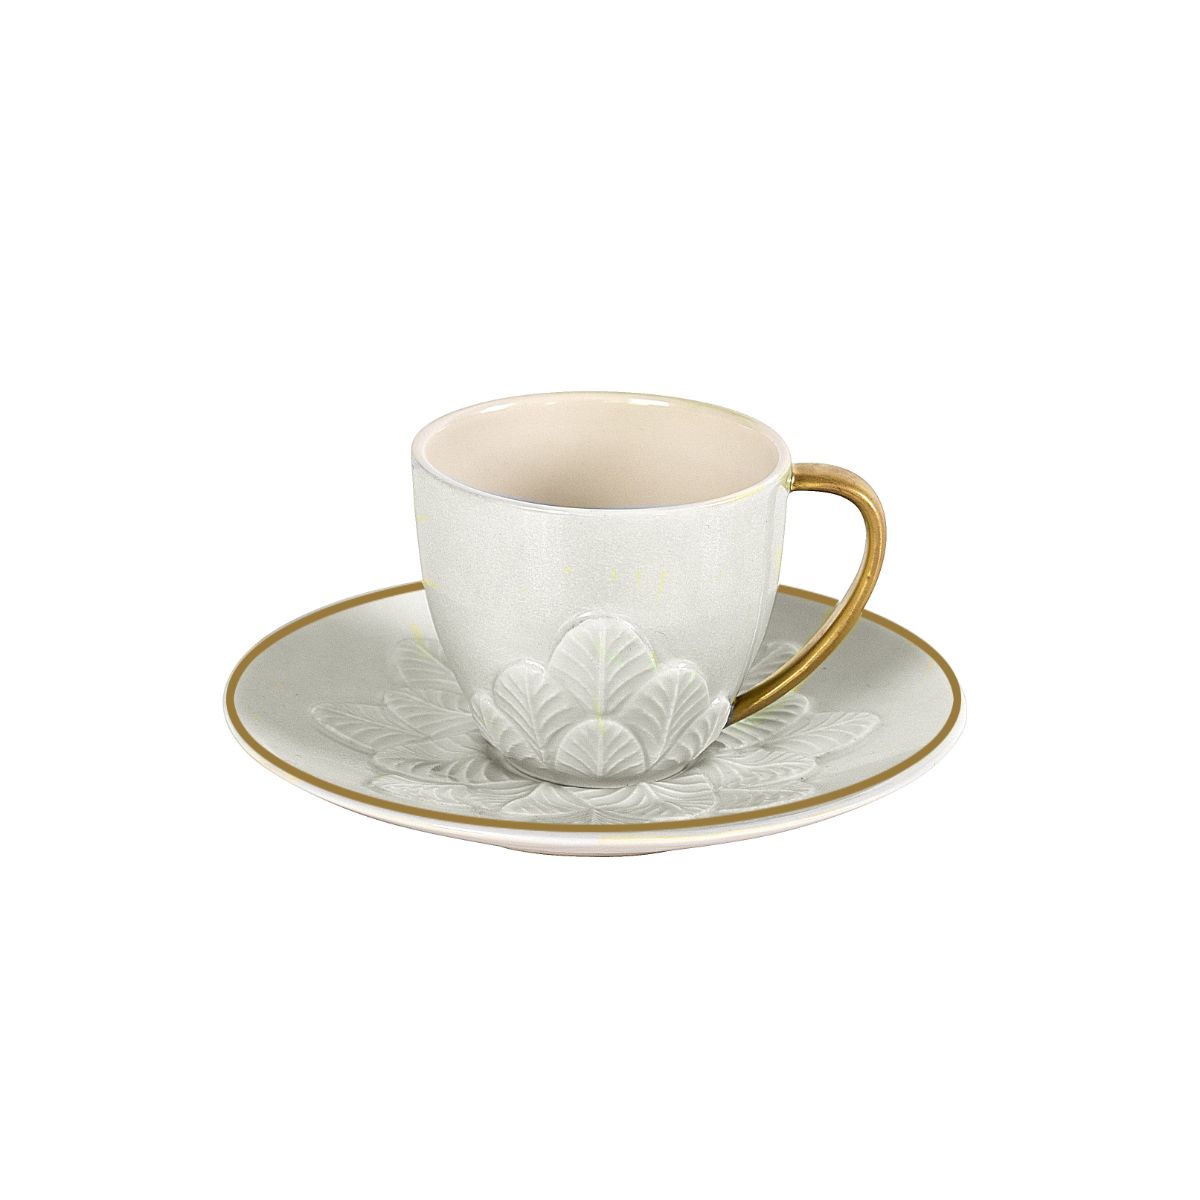 Peacock White & Gold Coffee Cup & Saucer